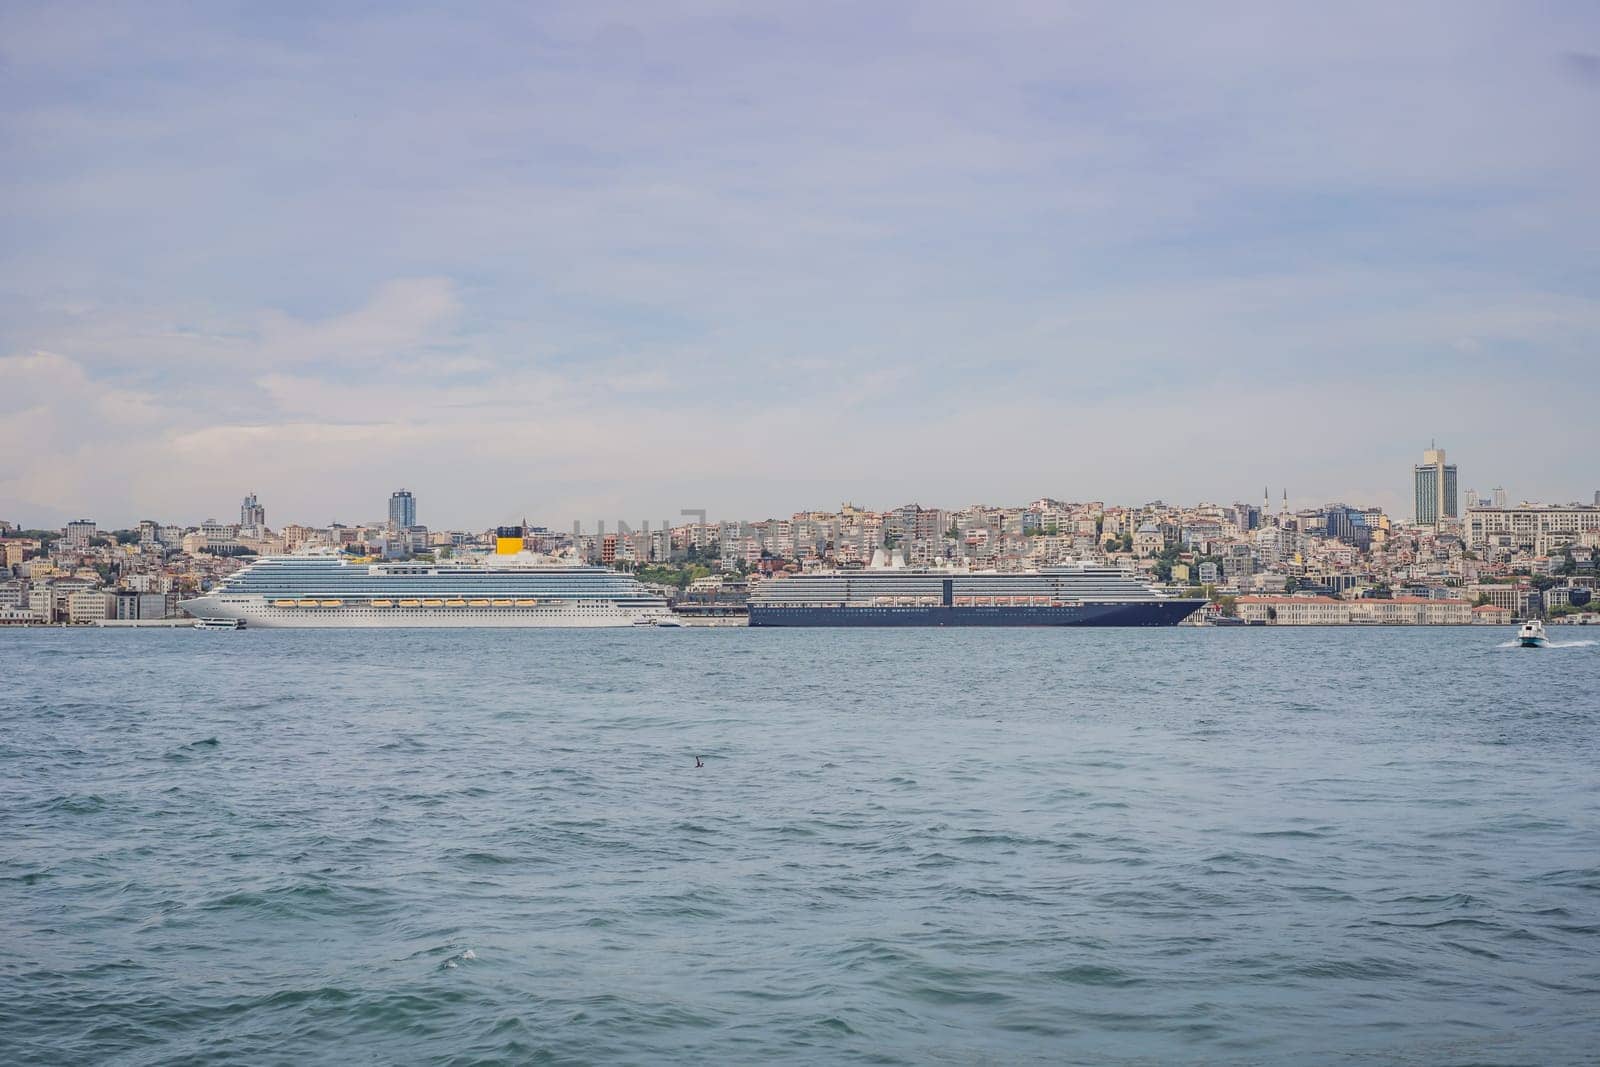 Huge cruise ship docked at terminal of Galataport, located along shore of Bosphorus strait, in Karakoy neighbourhood, with Galata tower in the background.